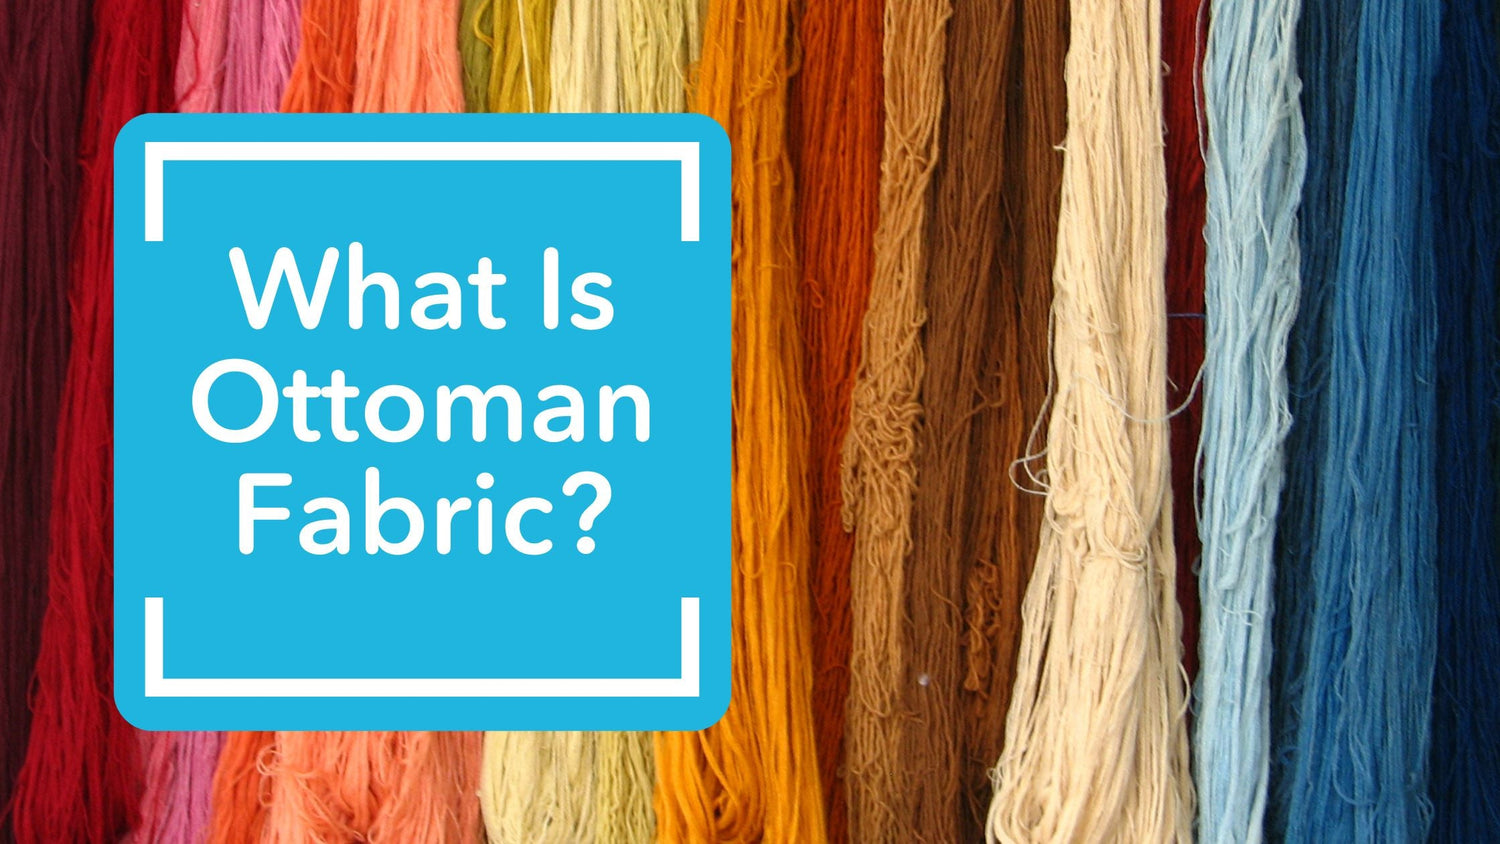 What Is Ottoman Fabric?